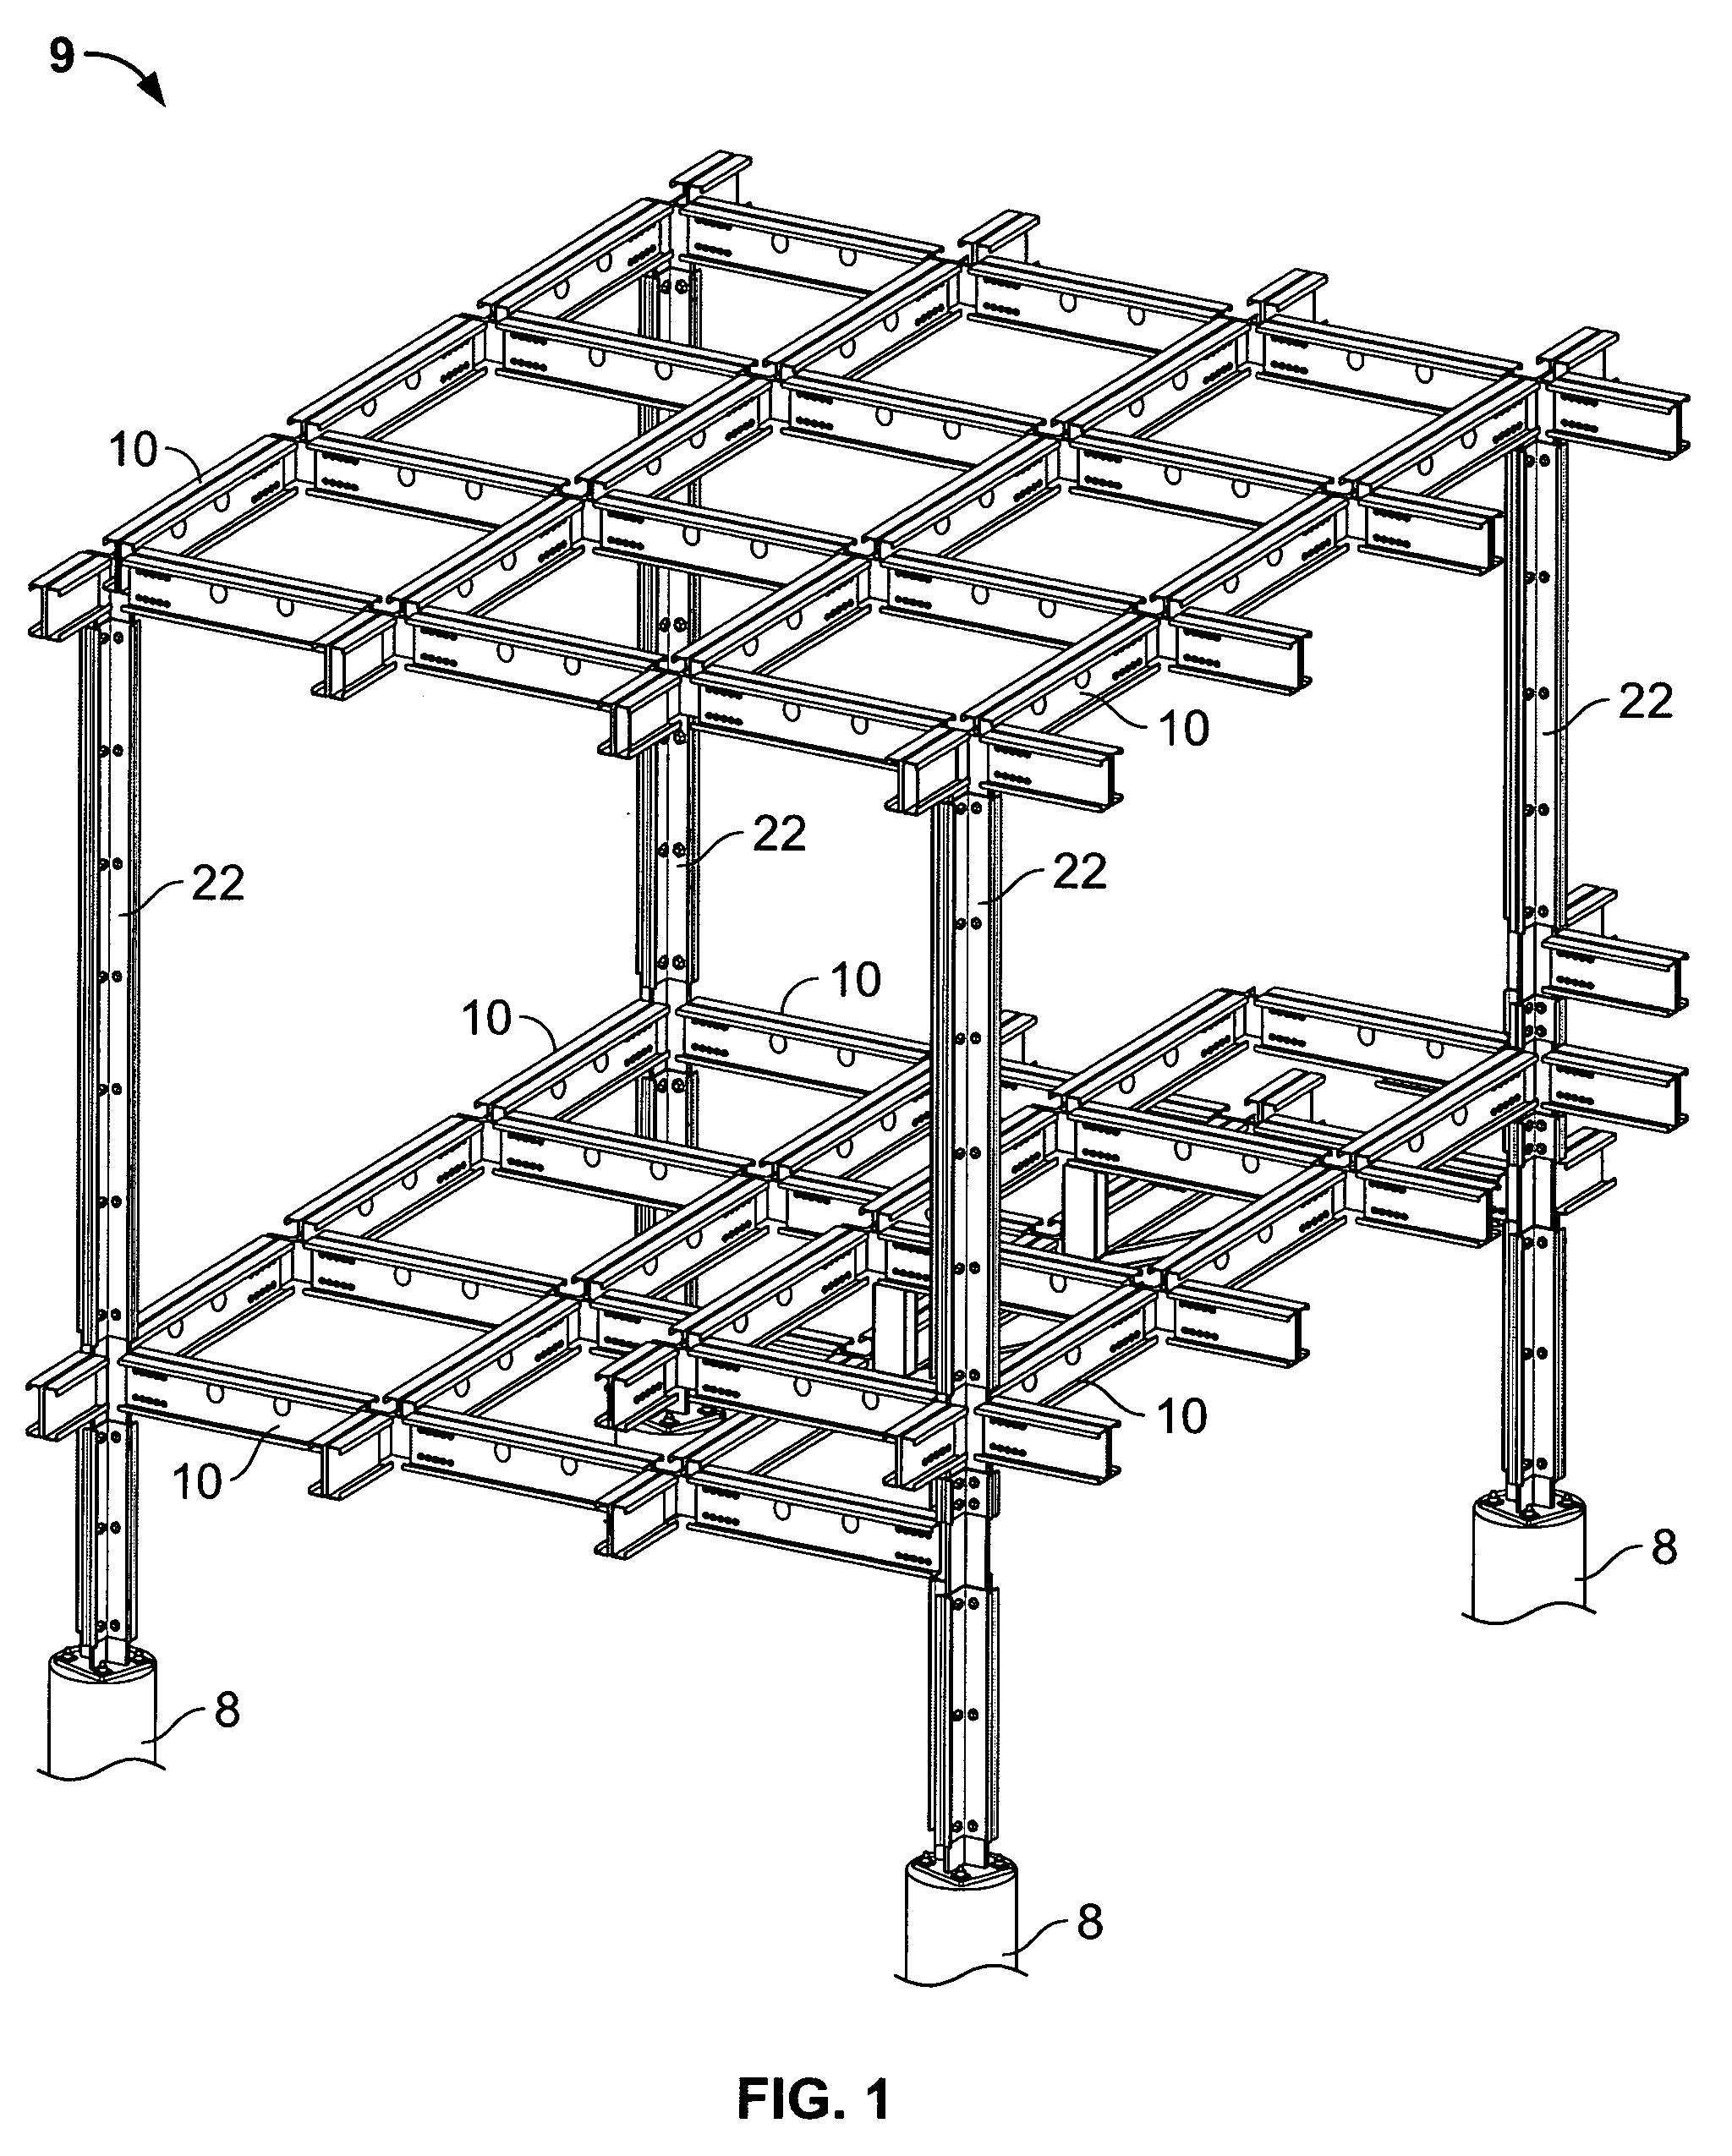 Two-way architectural structural system and modular support member